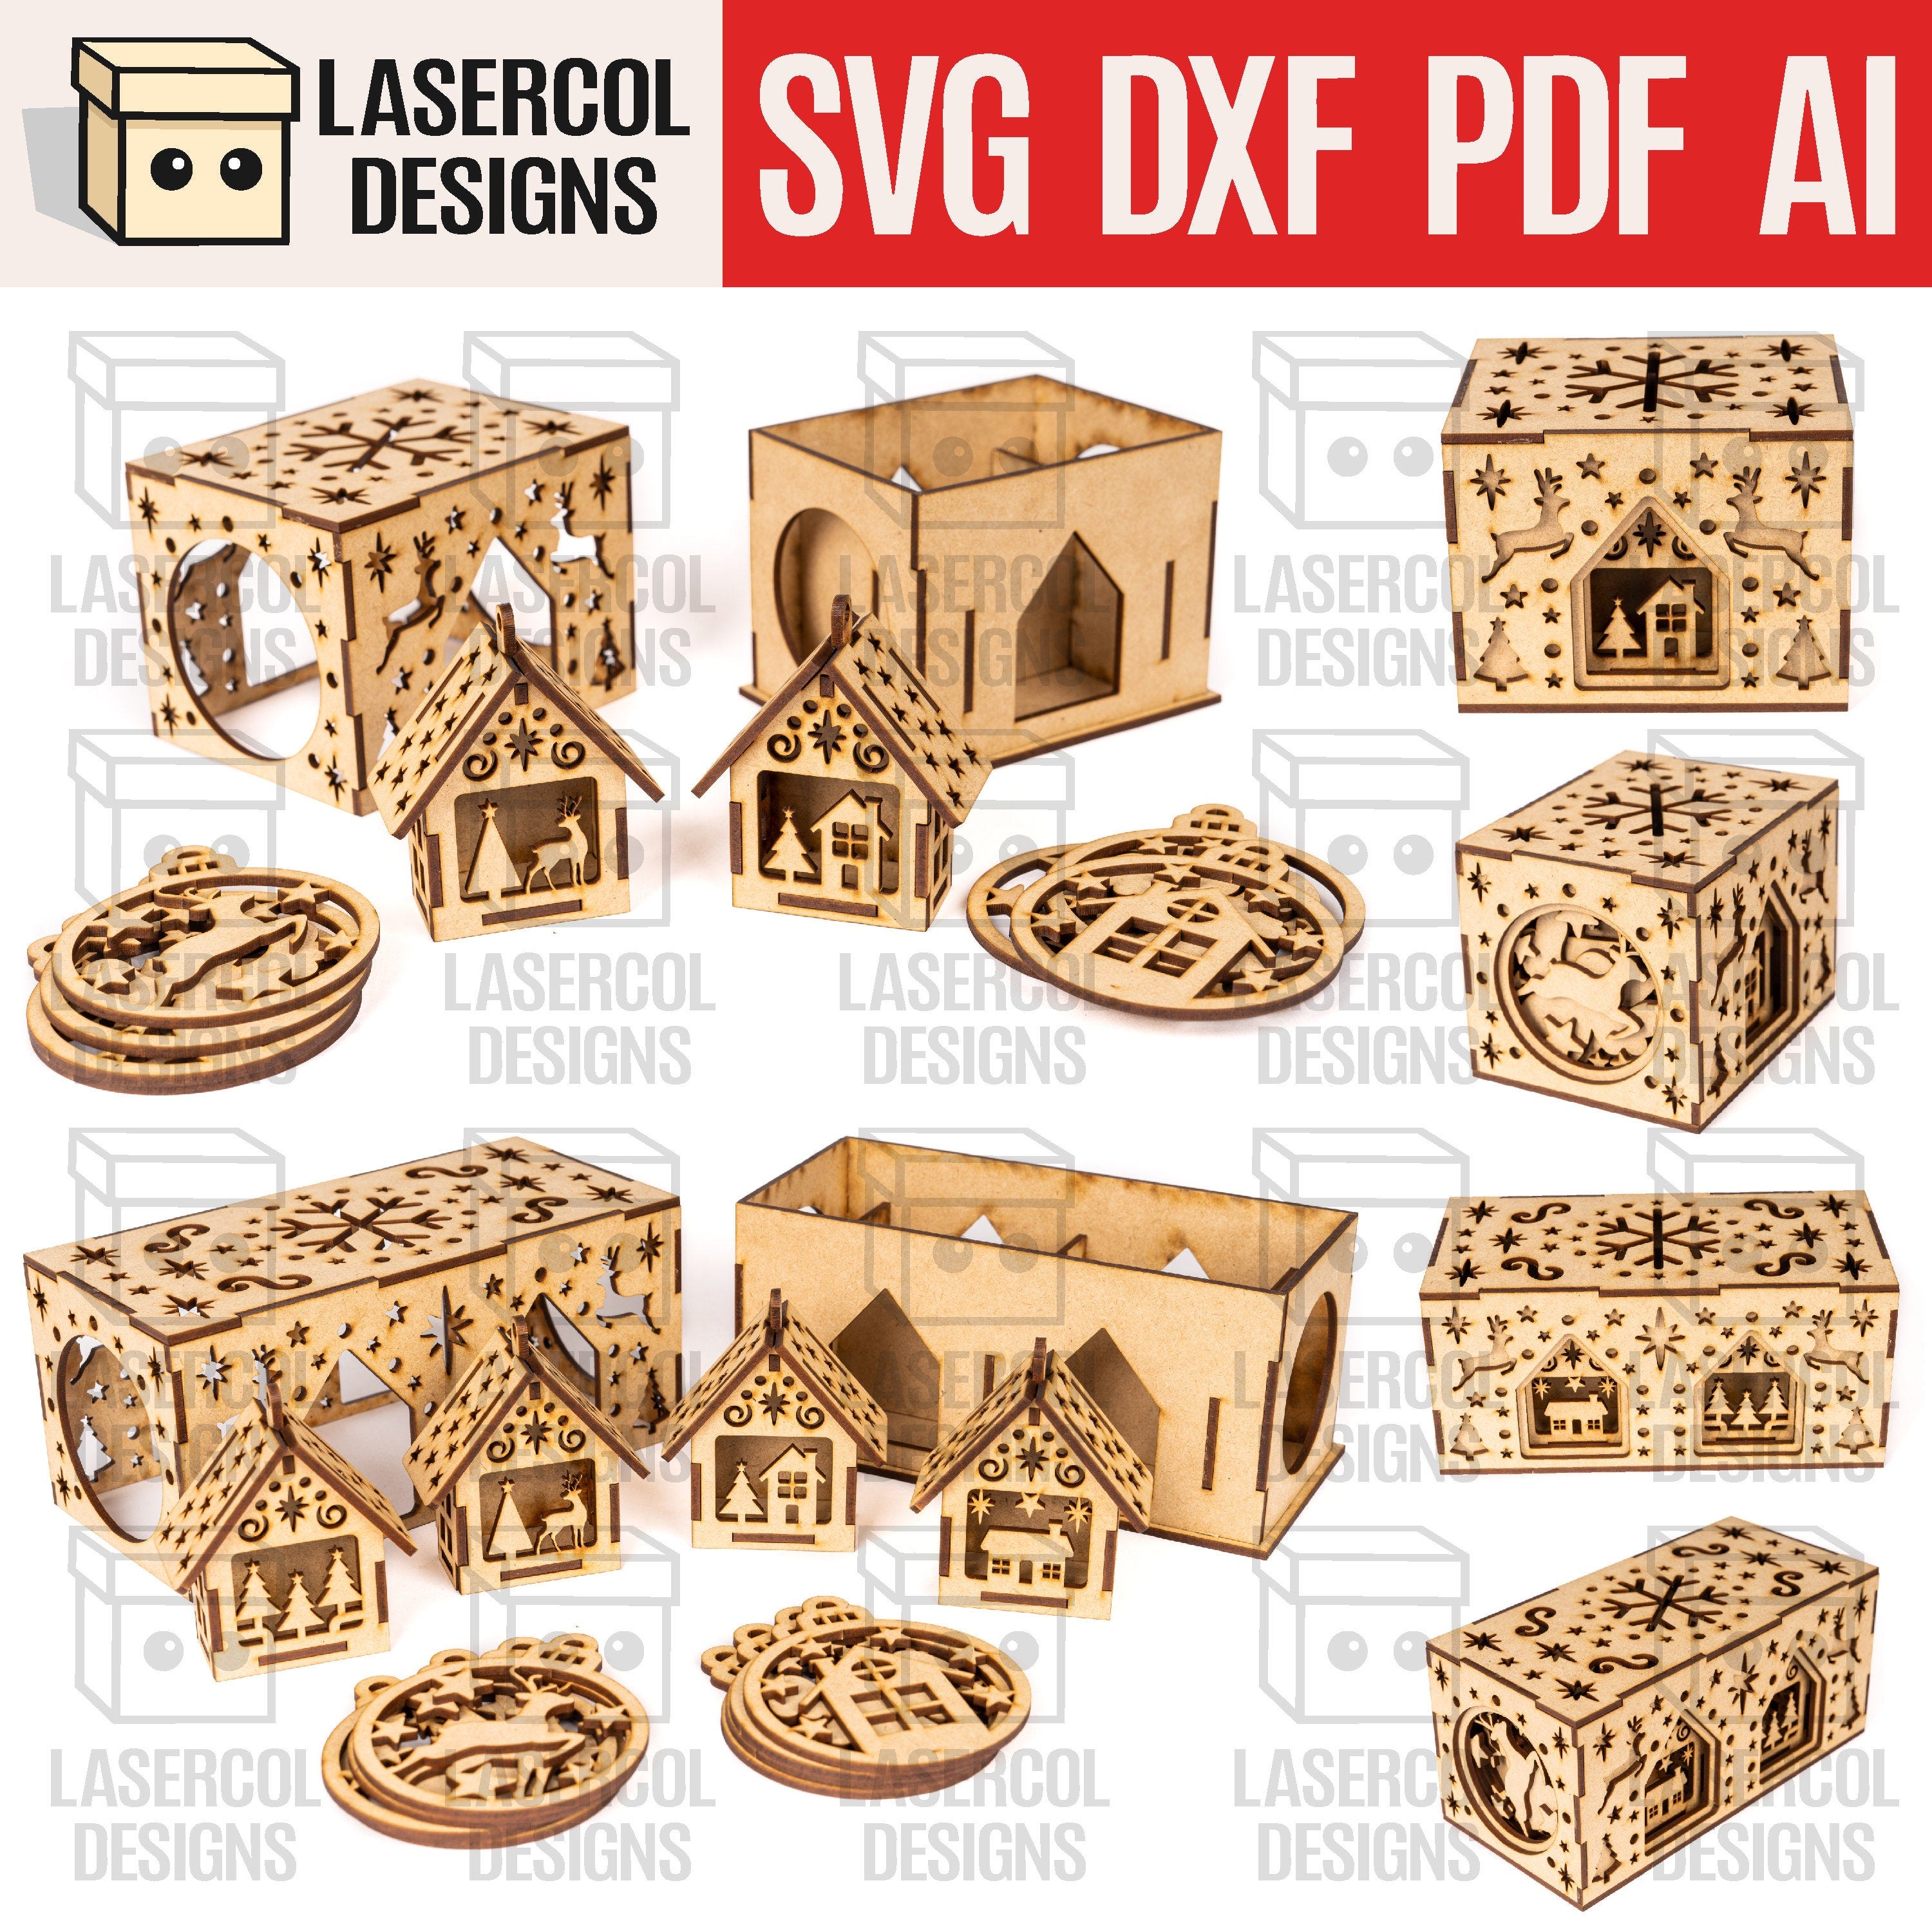 Christmas Ornaments Boxes - Laser Cut Files - SVG+DXF+PDF+Ai - Glowforge Files - Instant Download - Nightlight - Christmas Ornaments Files